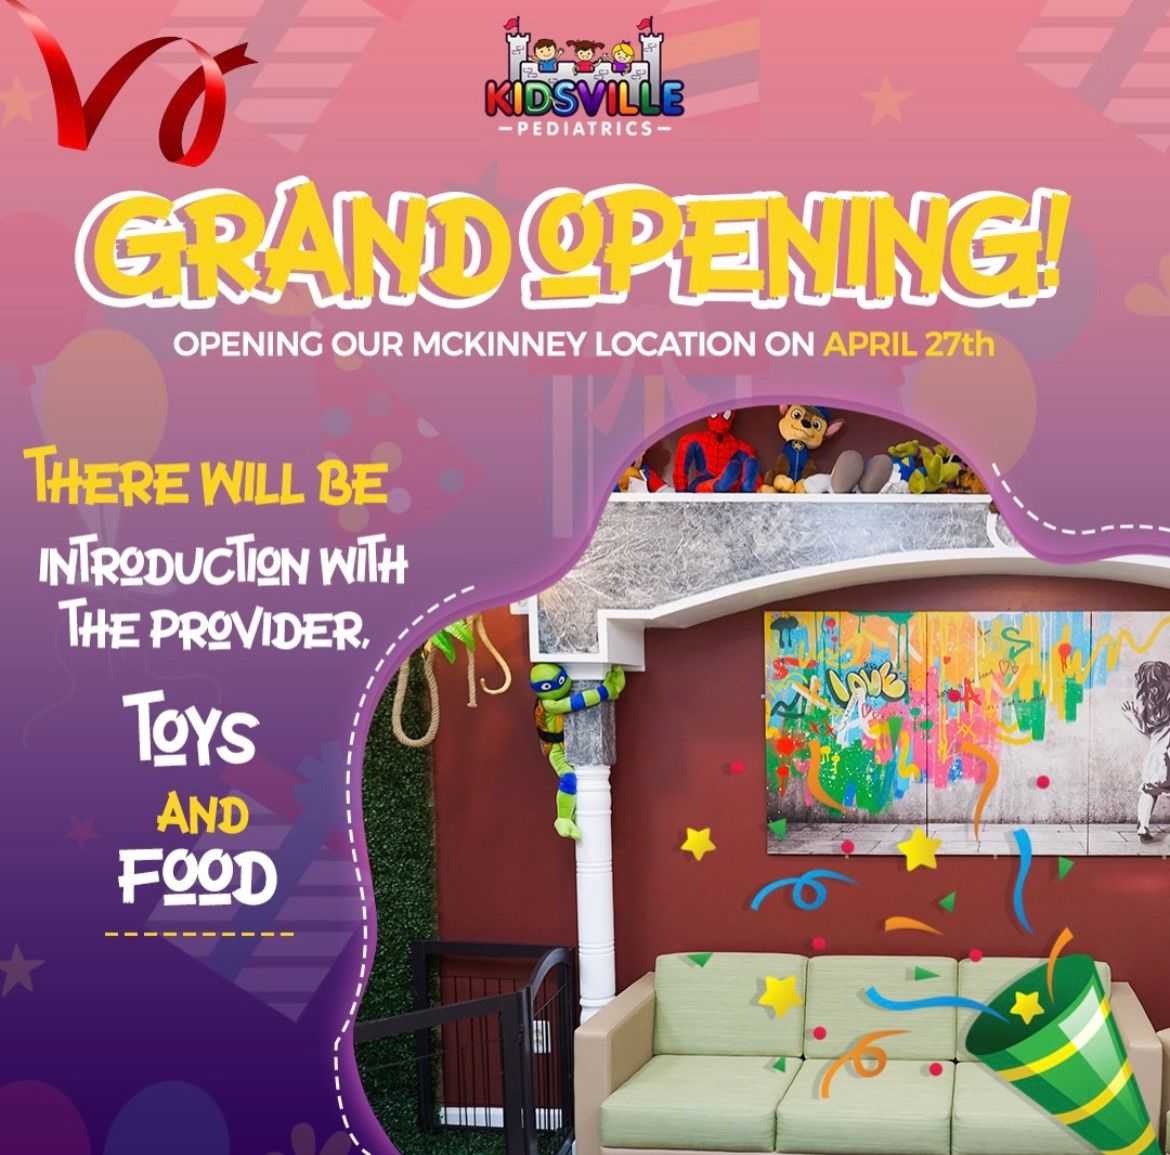 Kidsville McKinney Grand Opening and Launch party ? 